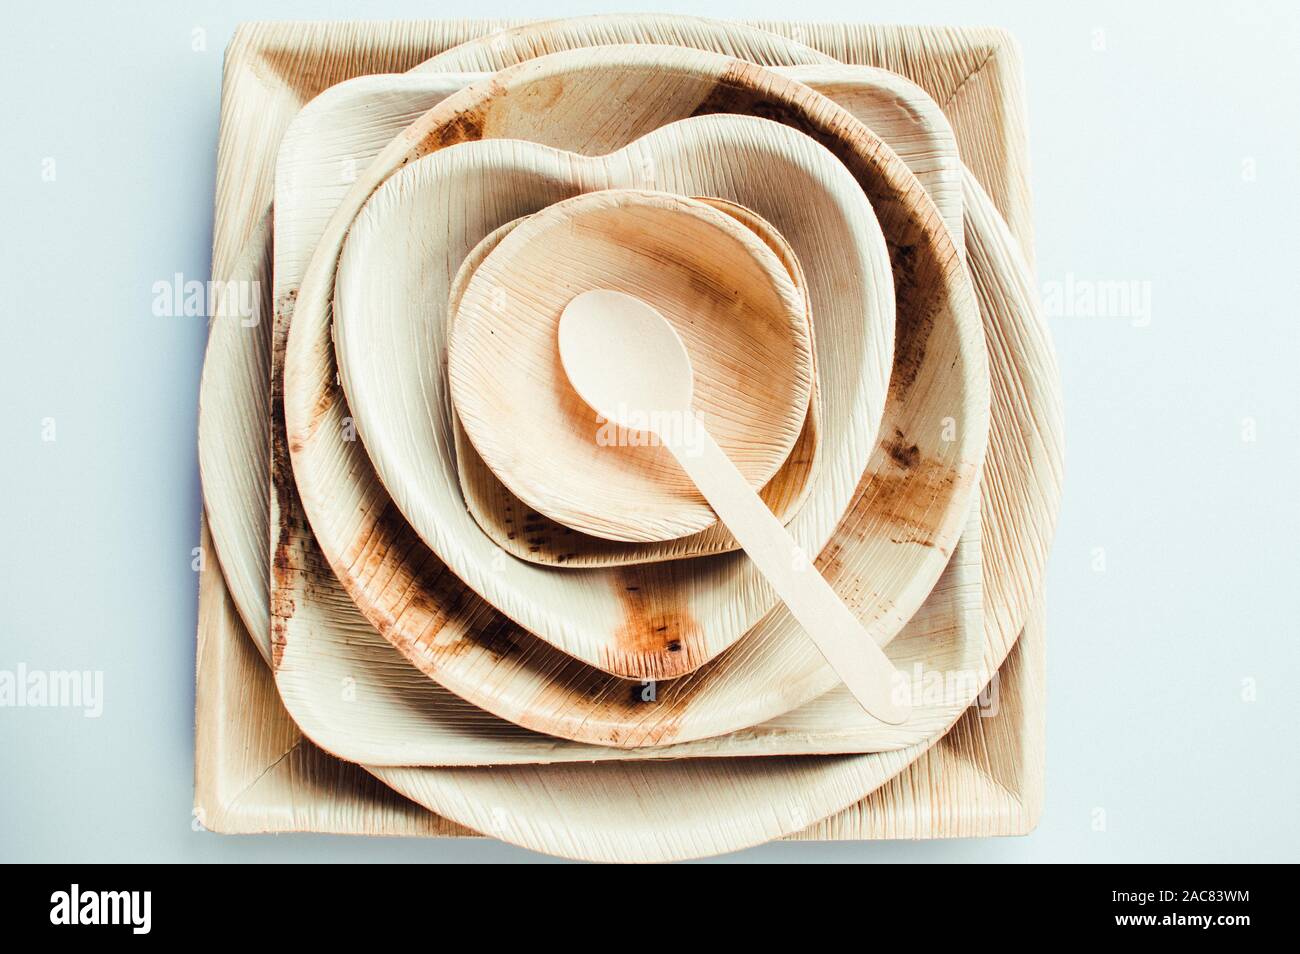 Stack of palm leaf based plates used for single use as party essential for a environment friendly plastic alternate solution Stock Photo